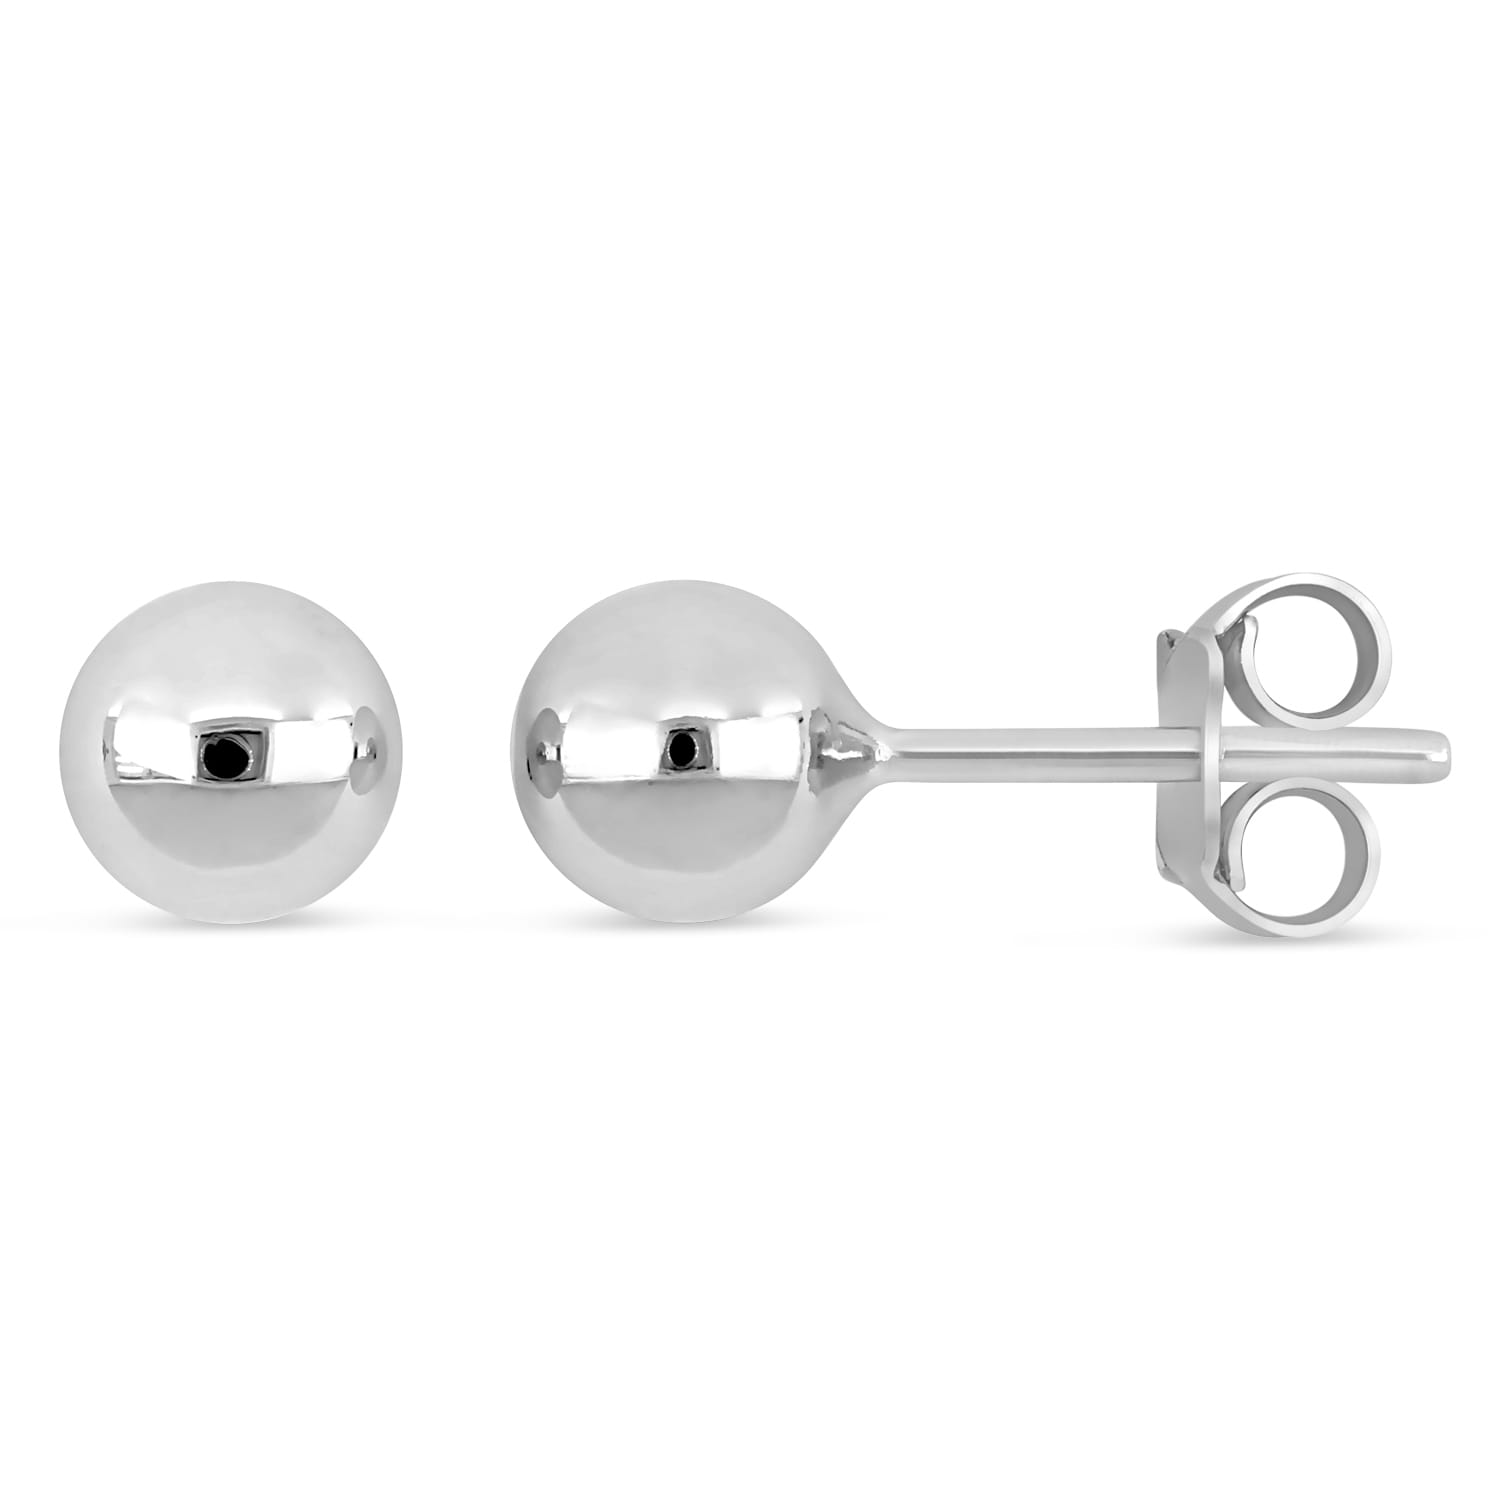 Extra Small Ball Earrings 18k White Gold